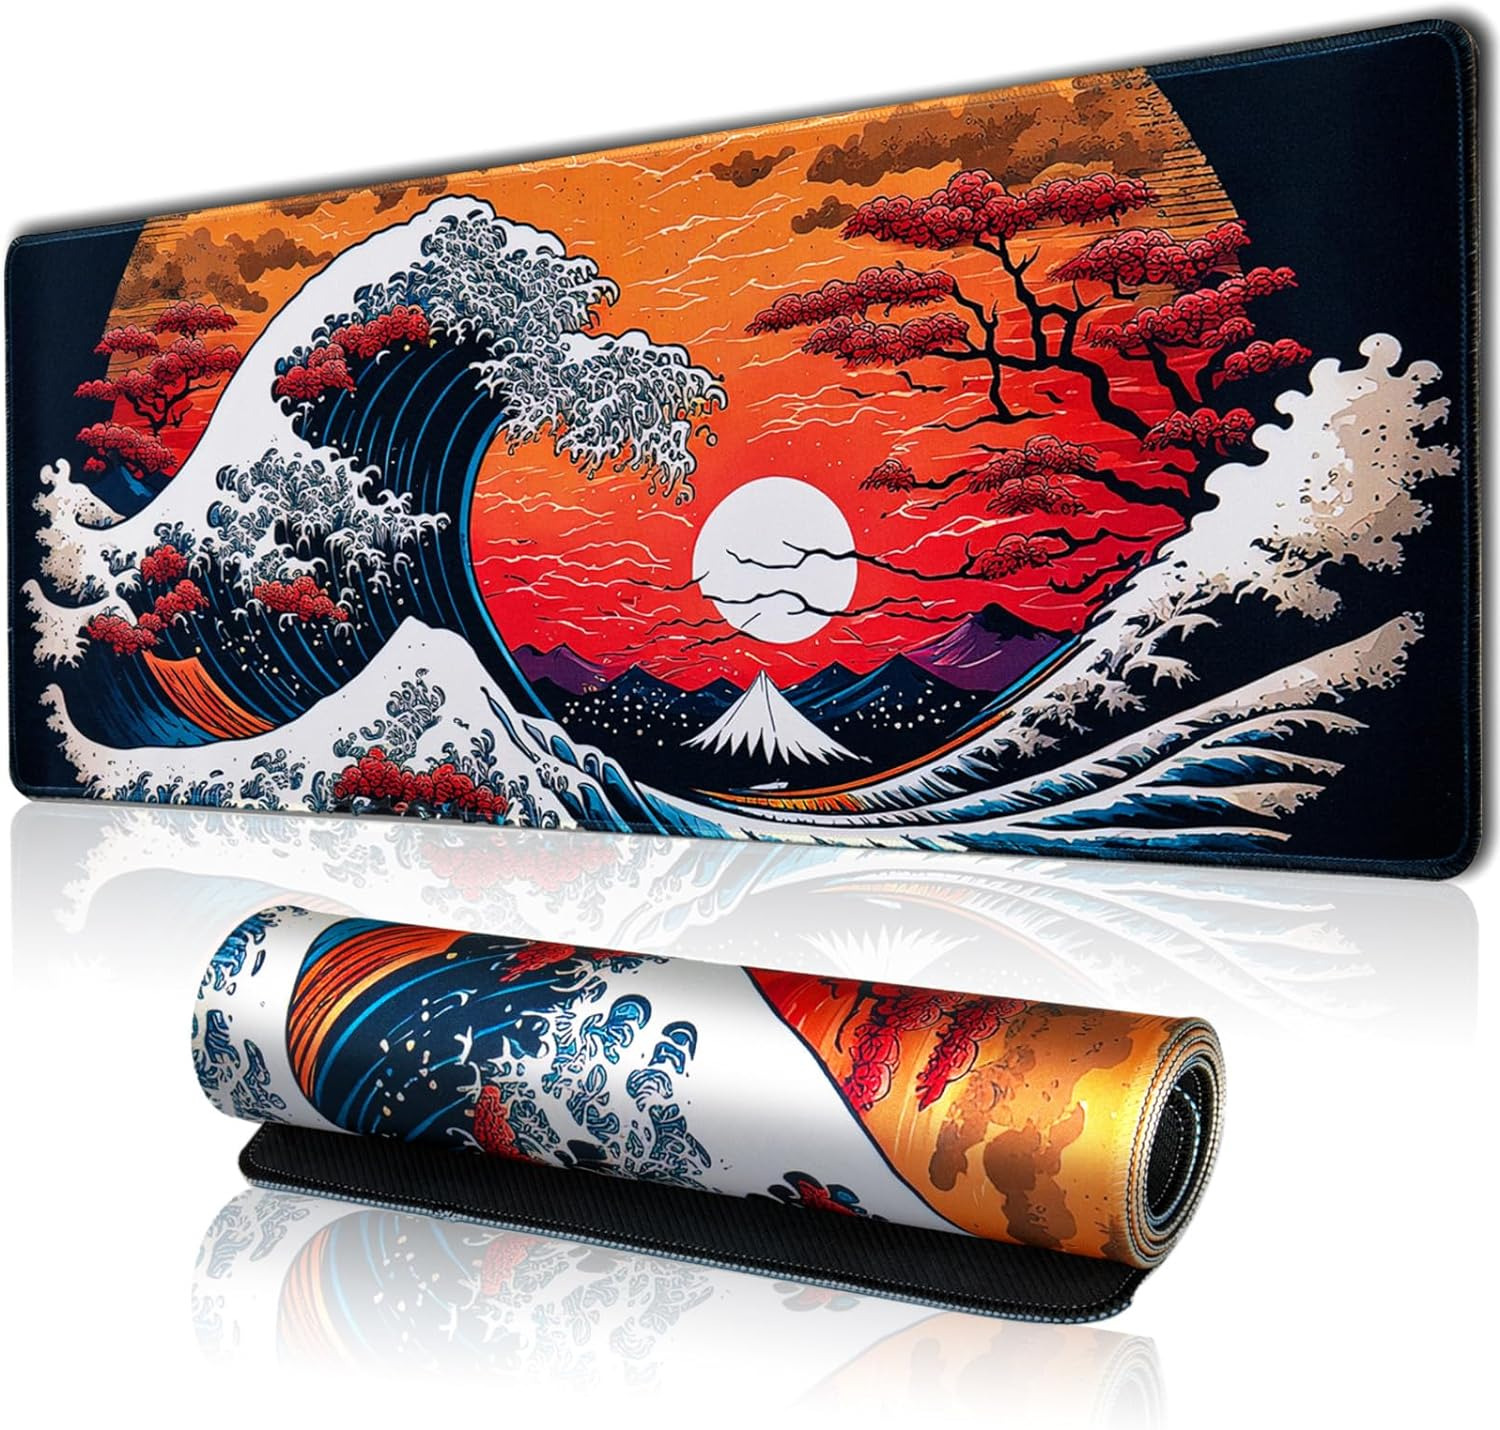 Japanese Sea Waves Gaming Mouse Pad for Desk, Waterproof Desk Pad 31.5X11.8 In